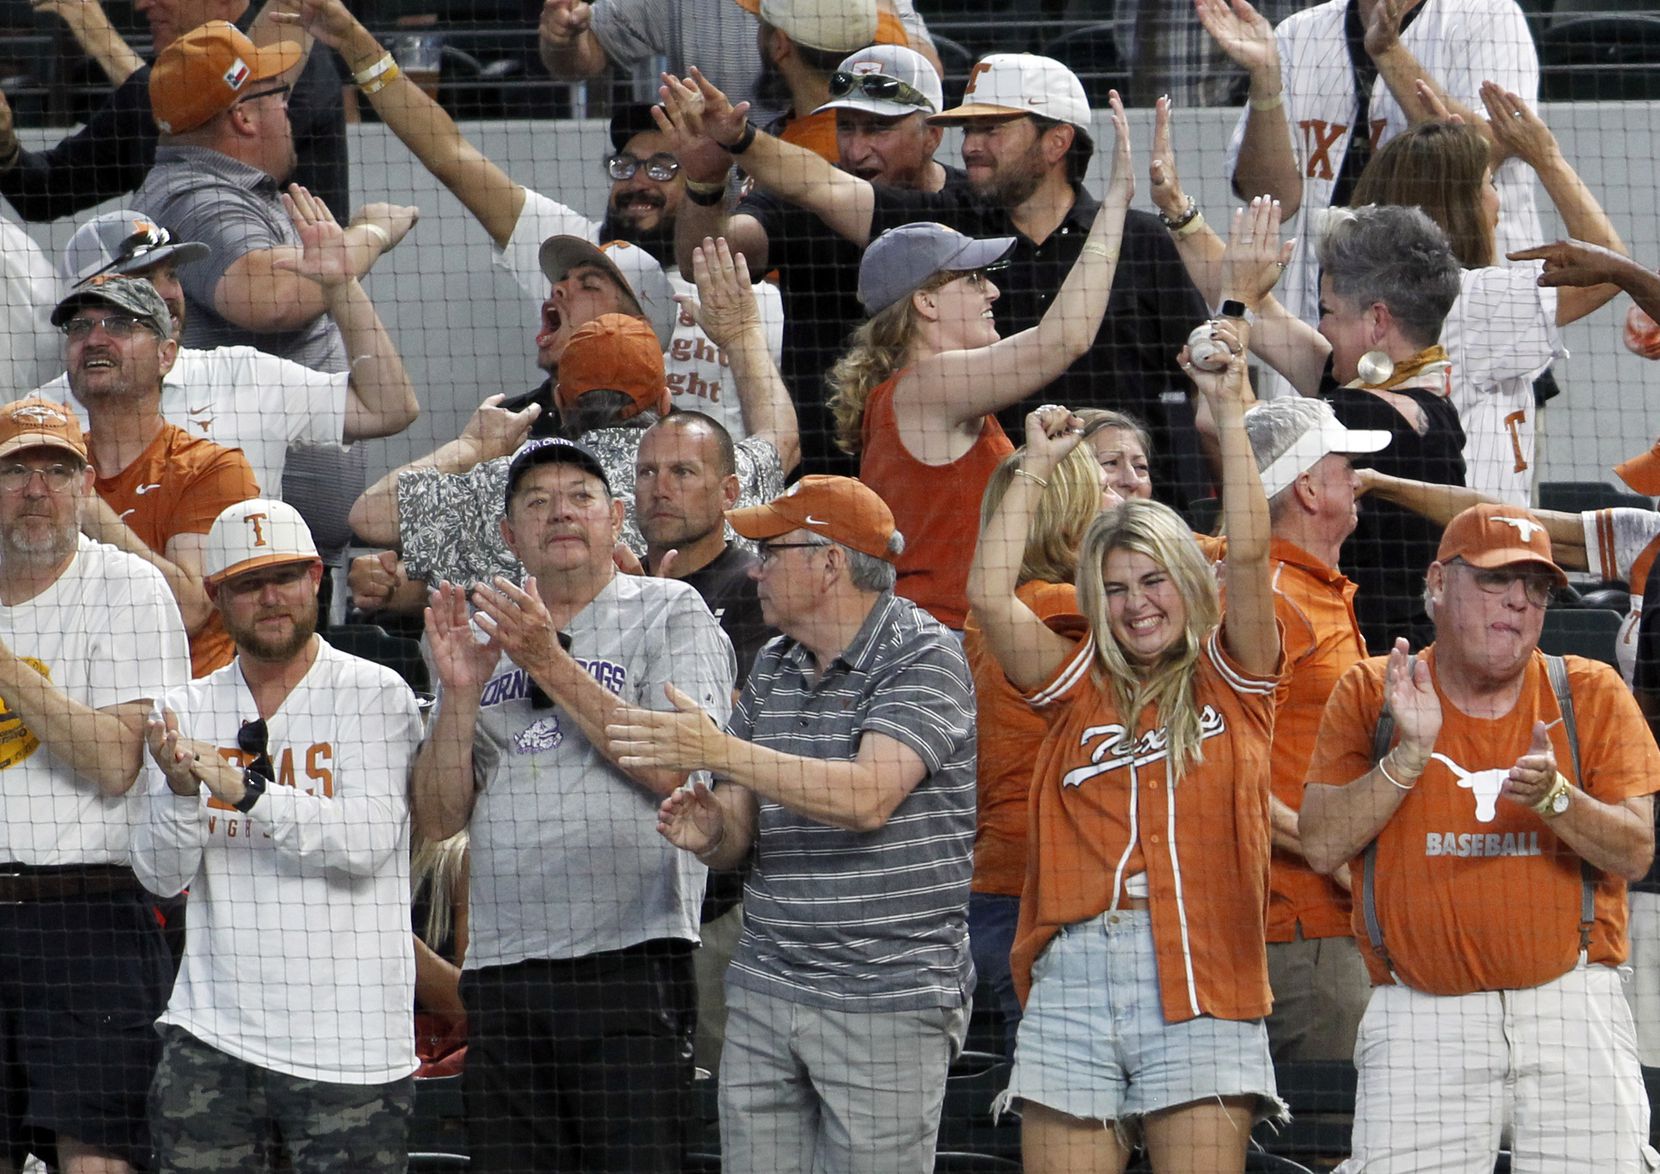 Texas Longhorns fans celebrate in a plethora of ways as they react to a base hit which...